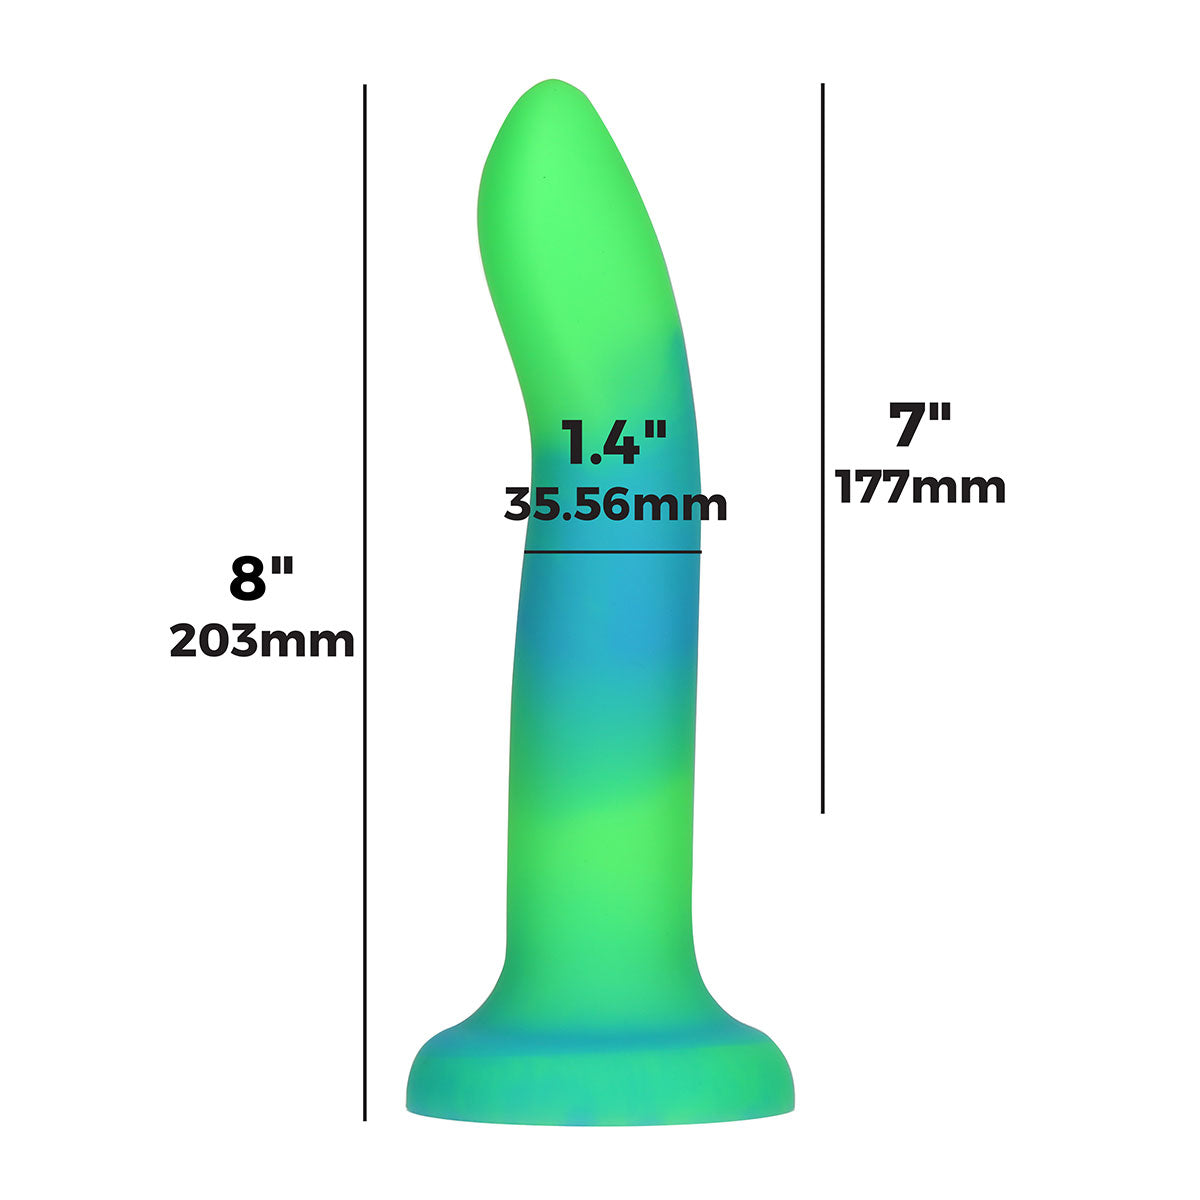 Addiction Glow-in-the-Dark Rave Dil 8" - Green Blue